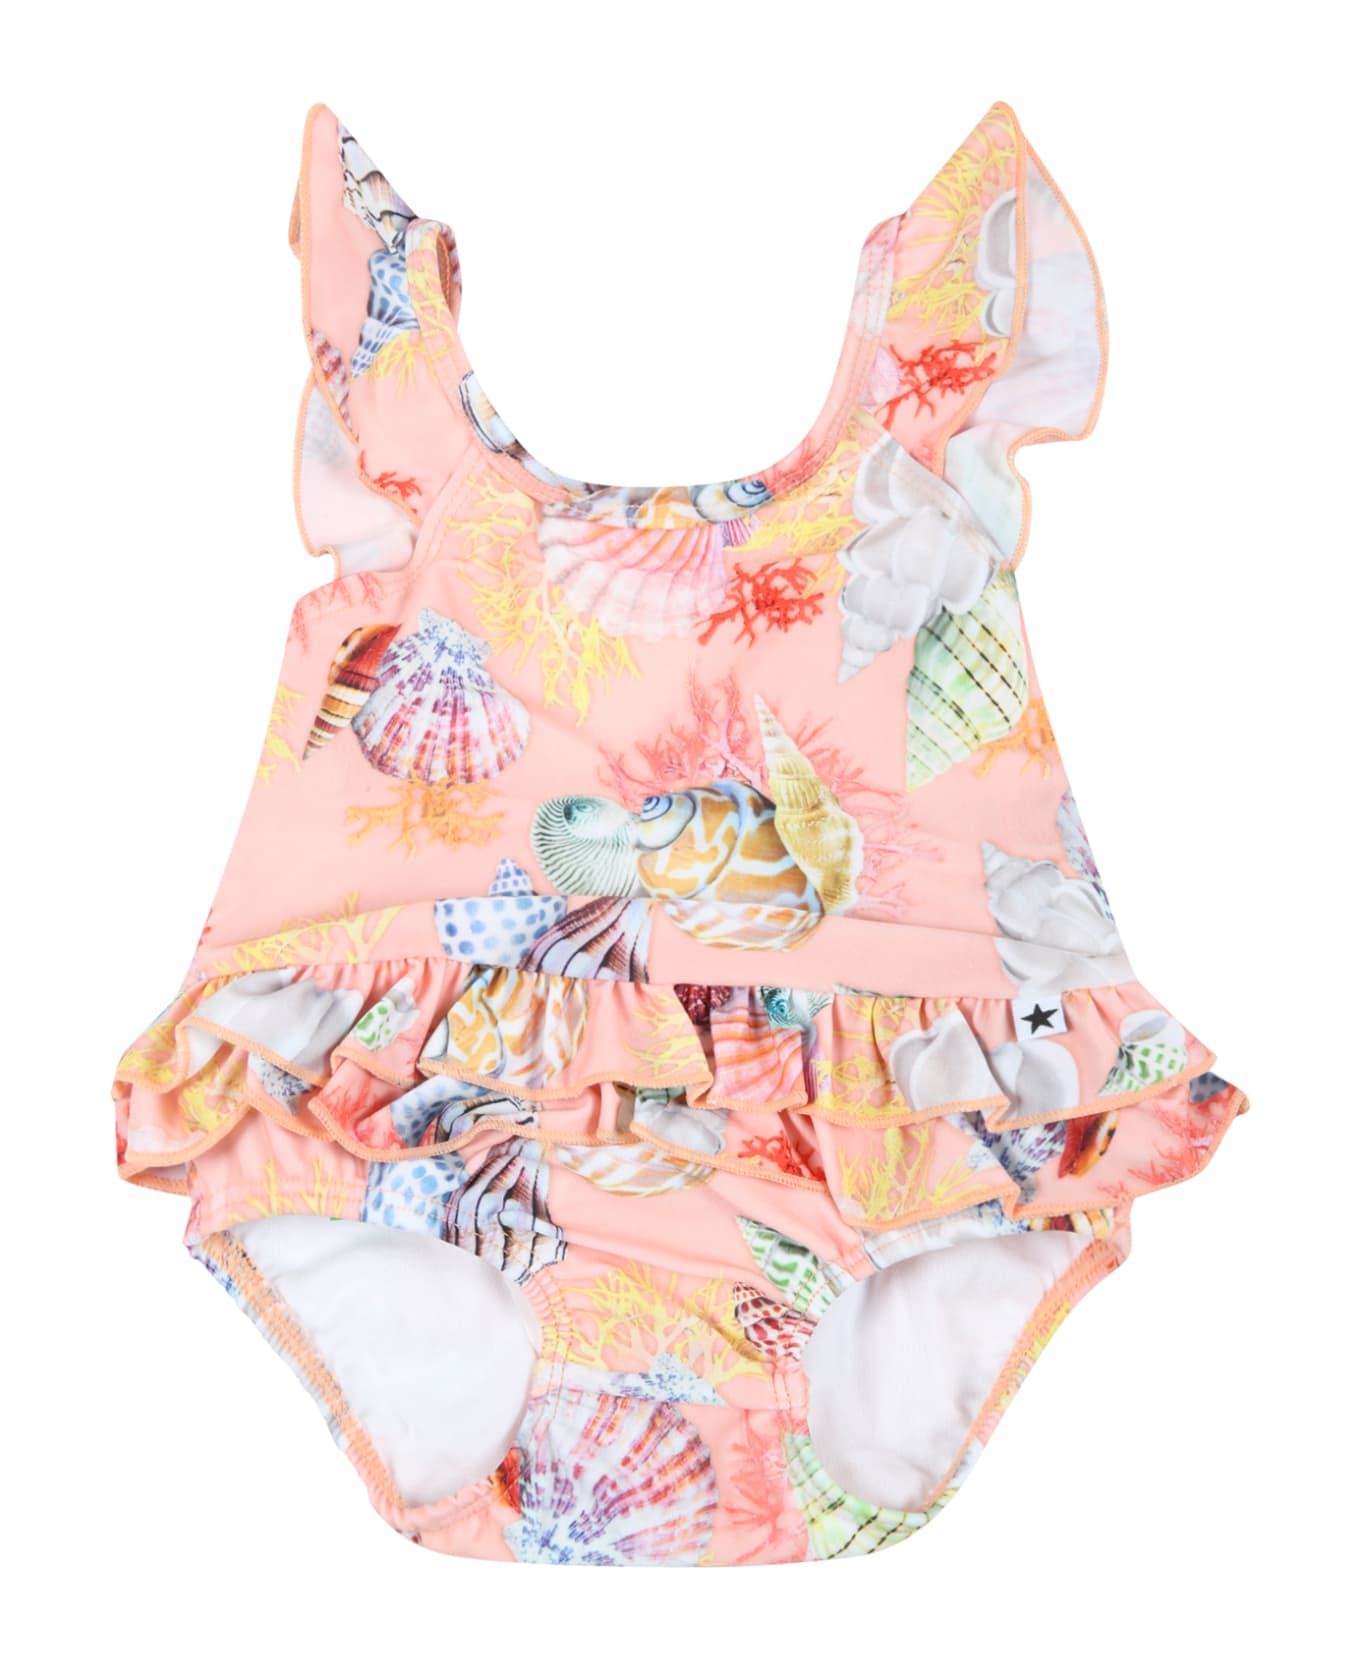 Molo Pink Swimsuit For Baby Girl With Shells - Multicolor